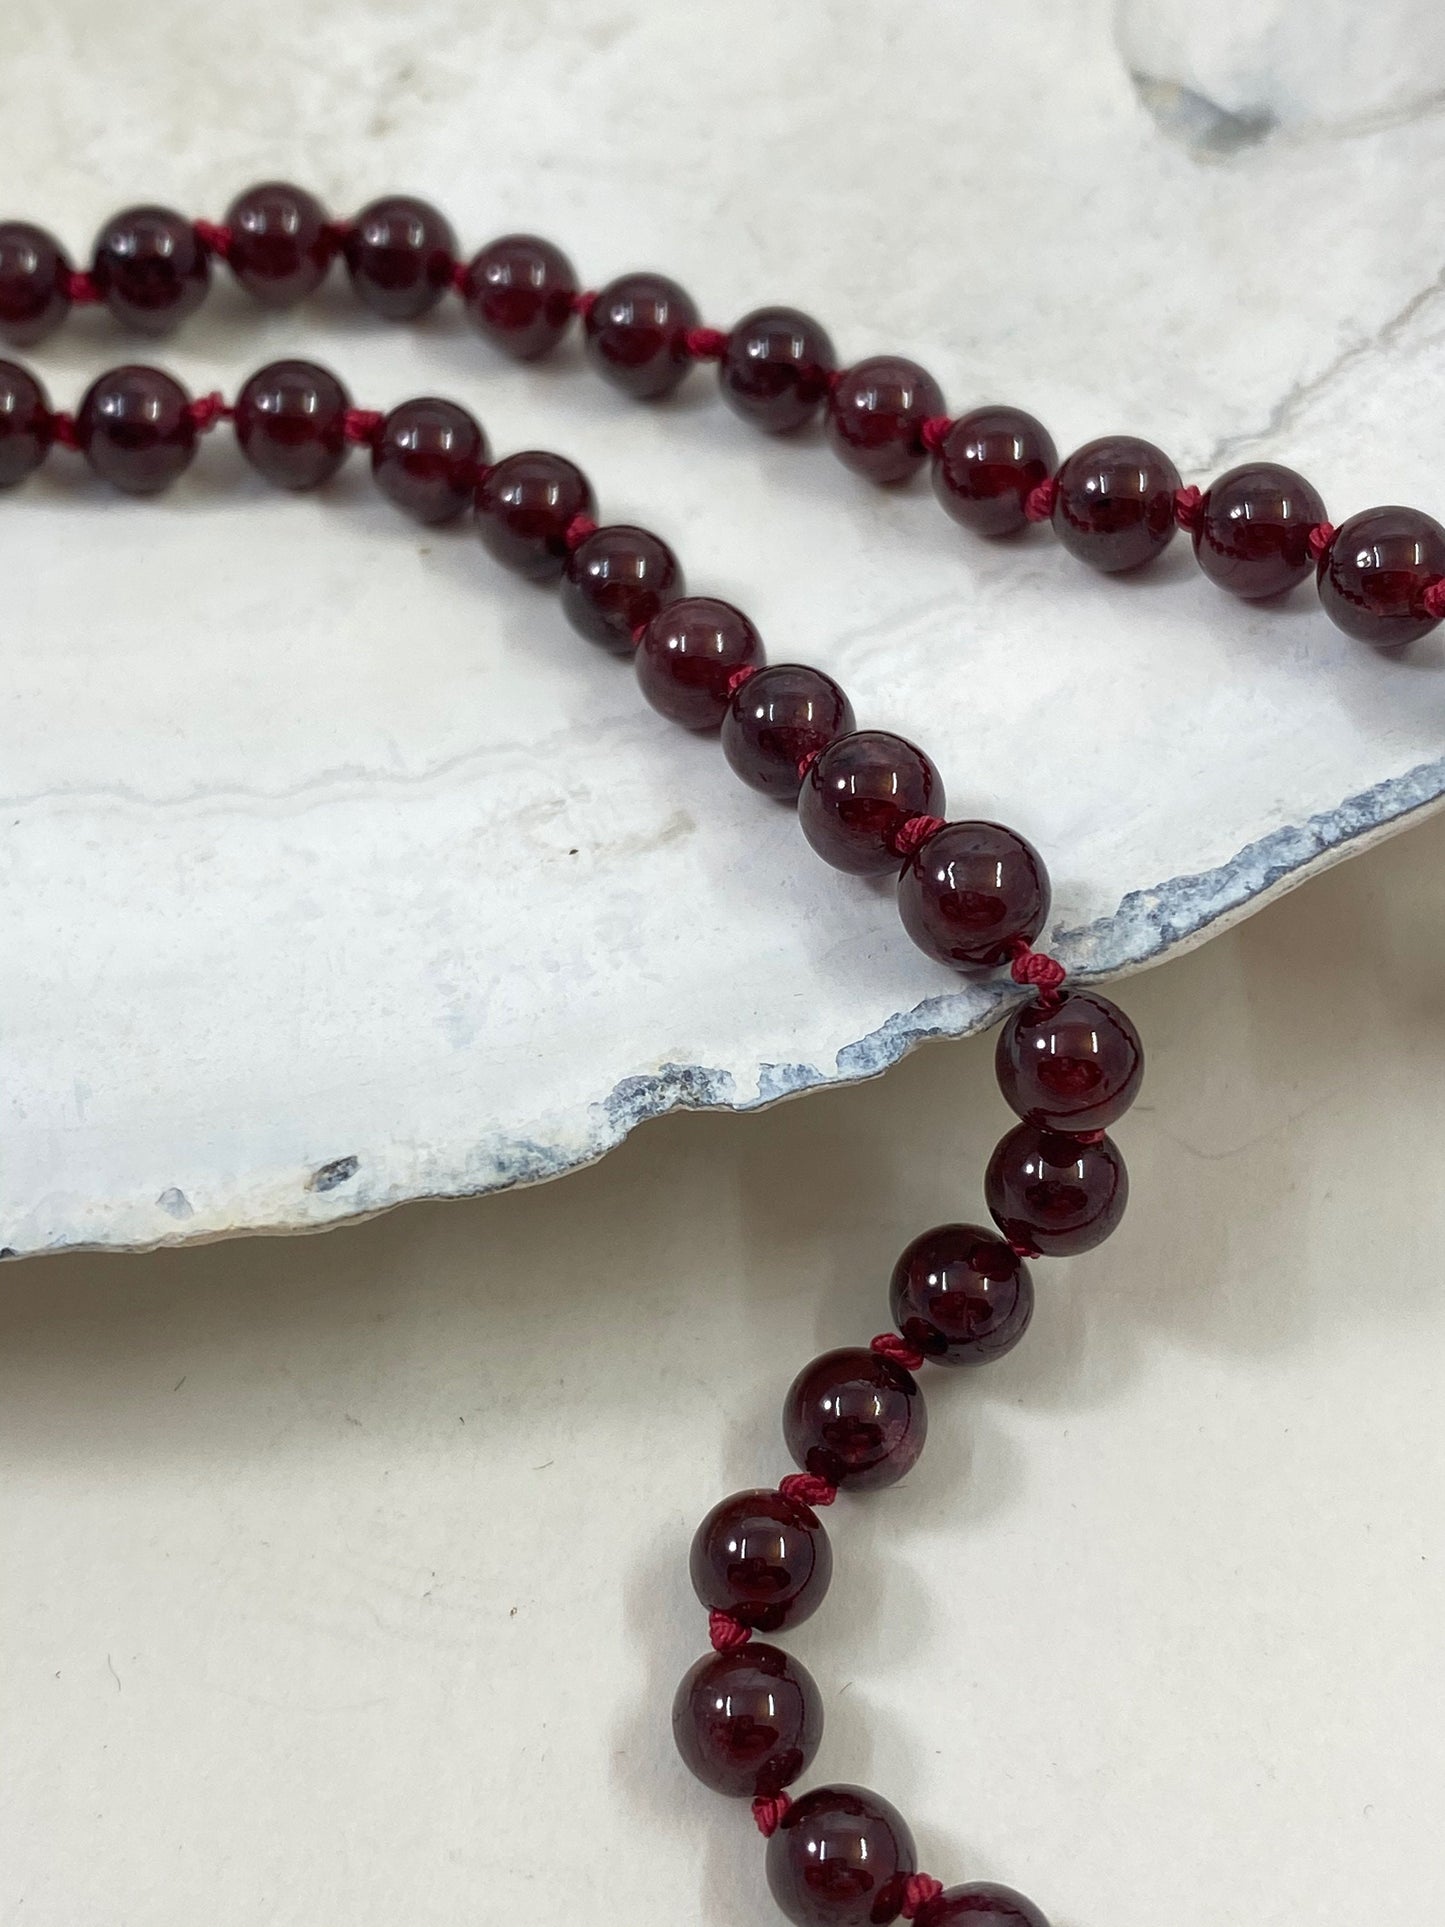 Exquisite garnet beaded and hand knotted necklace. Finished with a quality sterling silver lobster clasp.